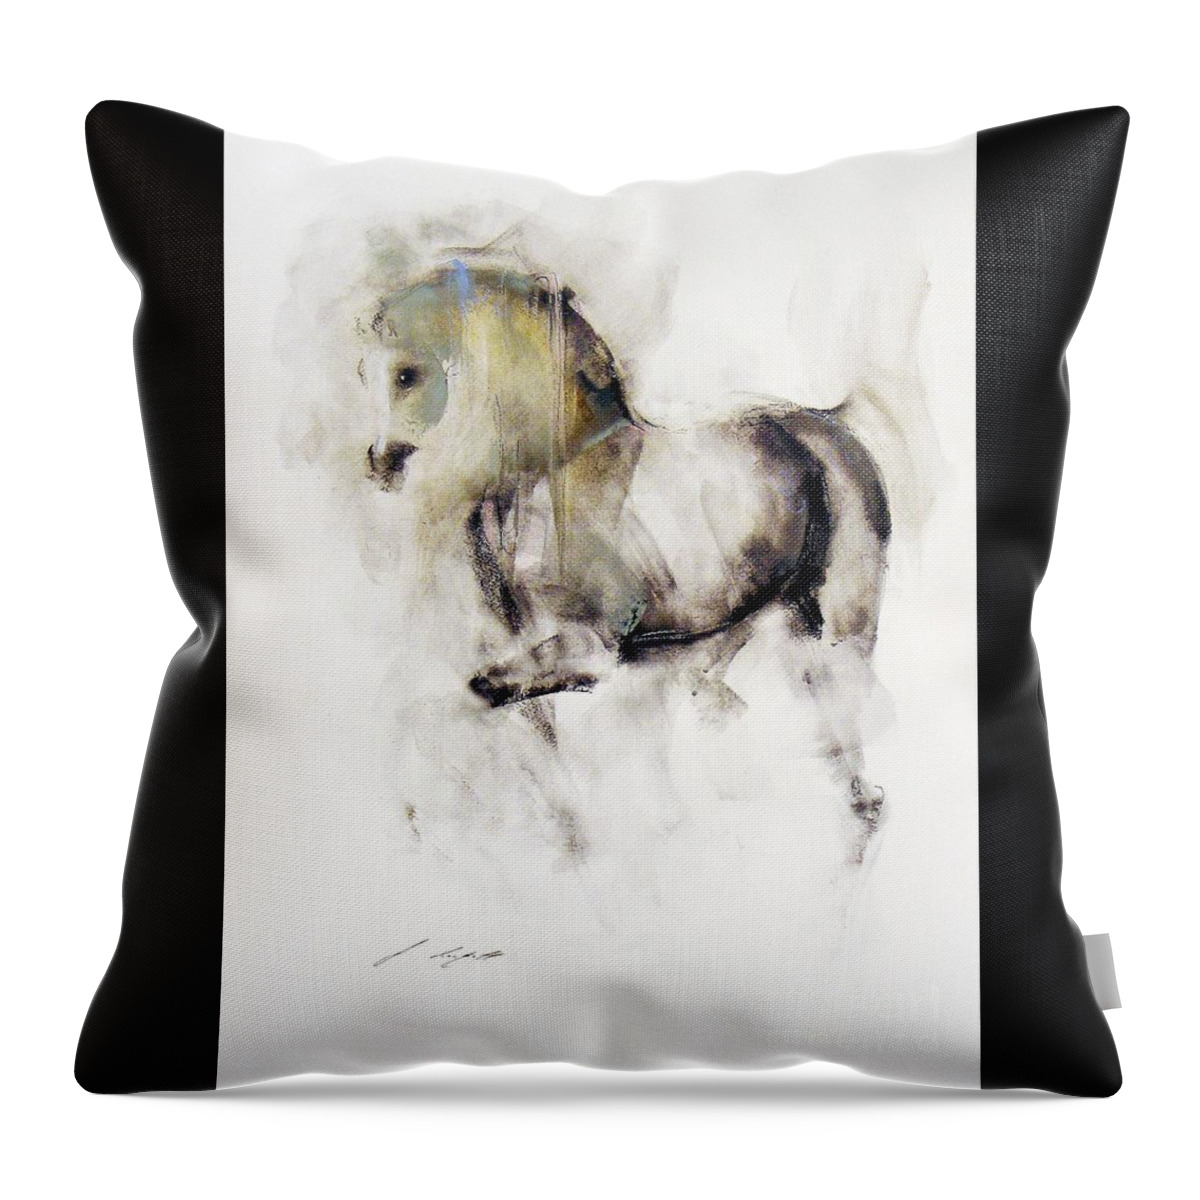 Equestrian Painting Throw Pillow featuring the painting Mito by Janette Lockett